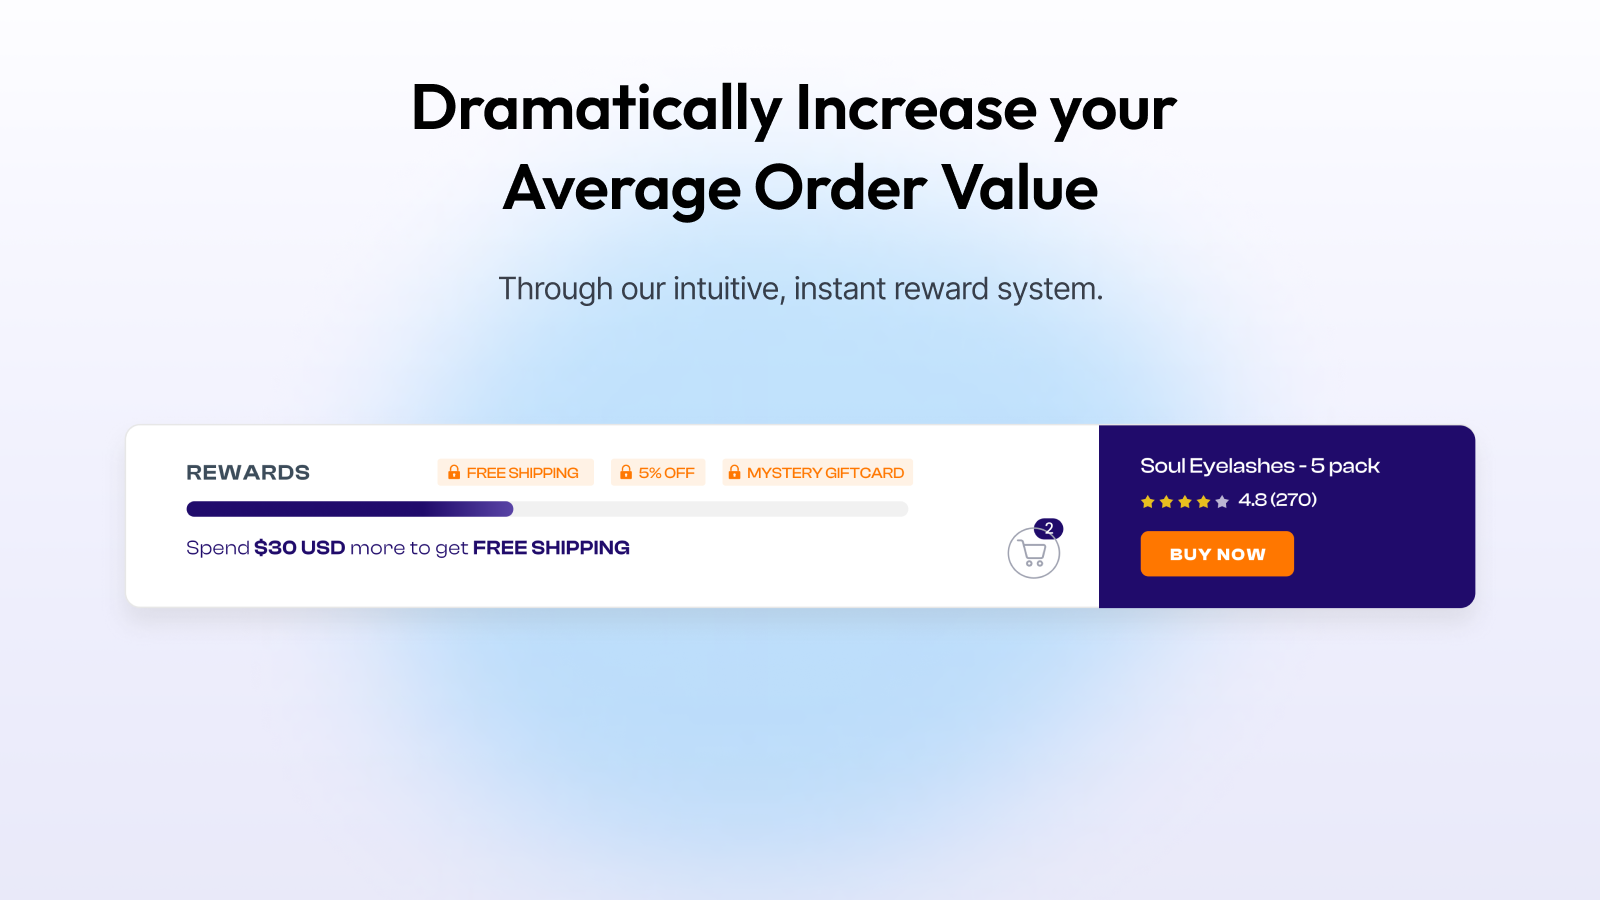 Increase your Average Order Value